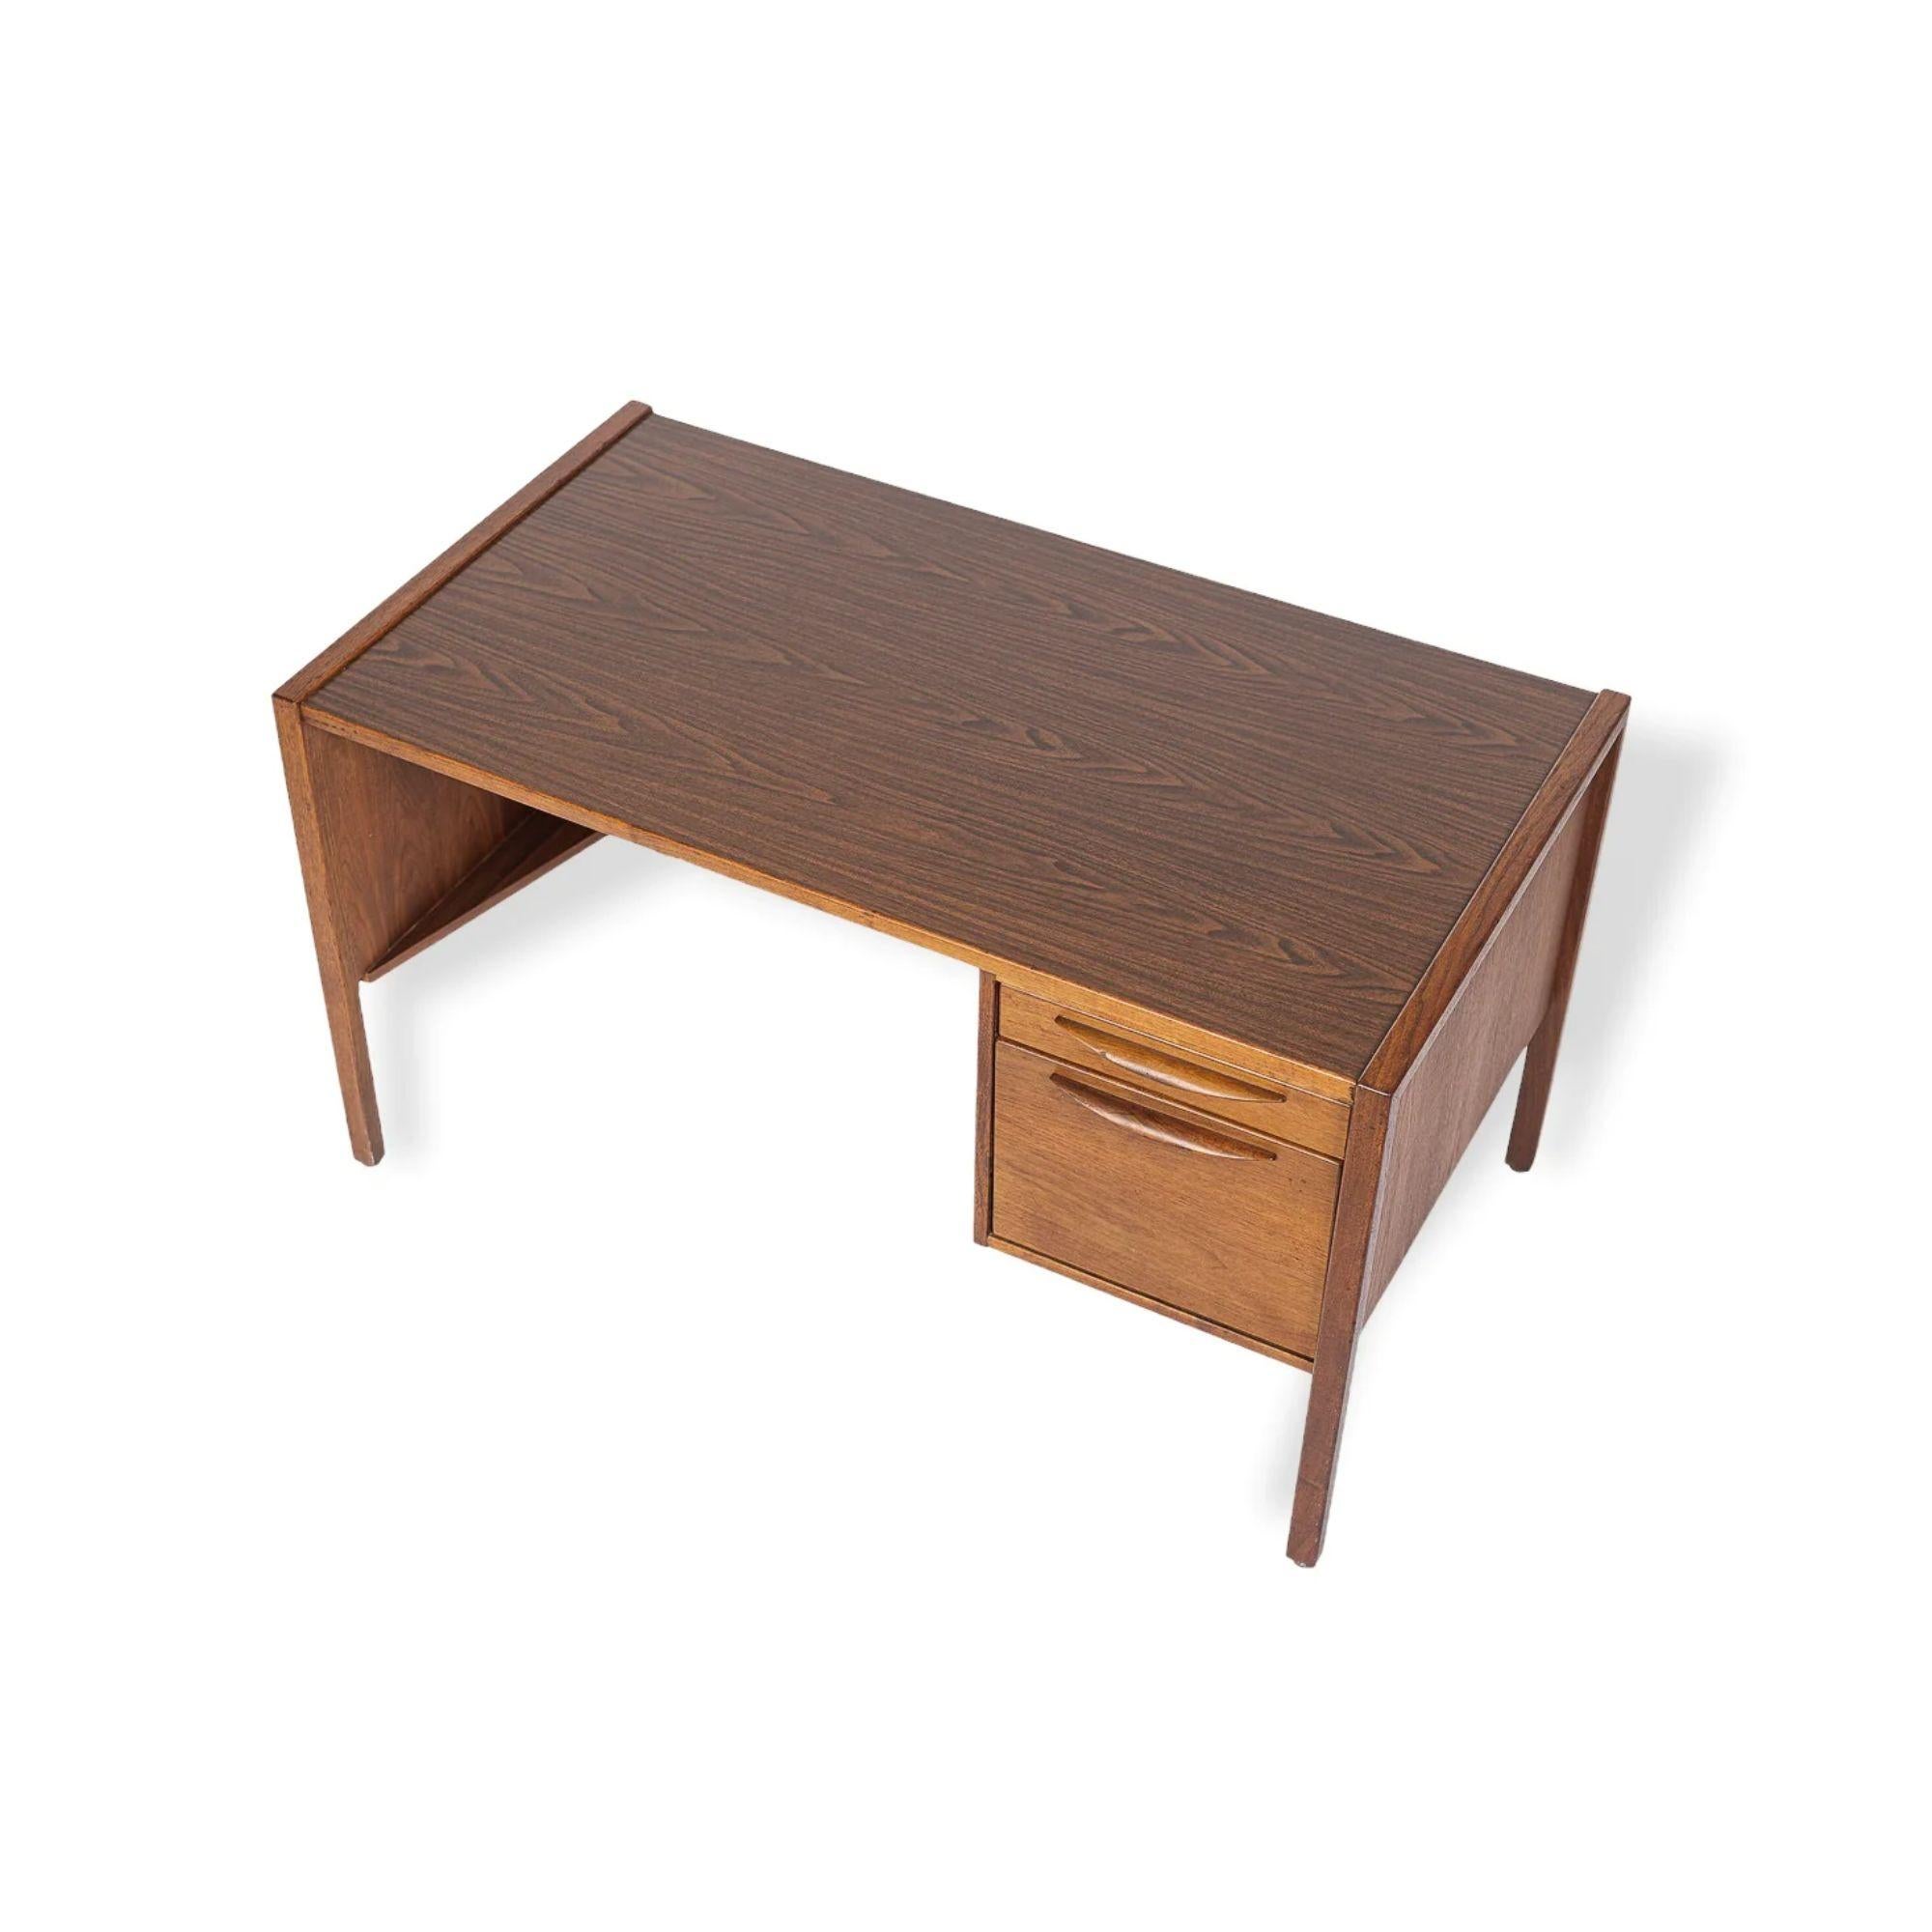 This vintage Mid-Century Modern desk by Jens Risom circa 1960 has a Classic Danish modern design with clean, Minimalist, geometric lines. The desk is solid, heavy and well-crafted and features a solid walnut wood frame with laminate top and back.